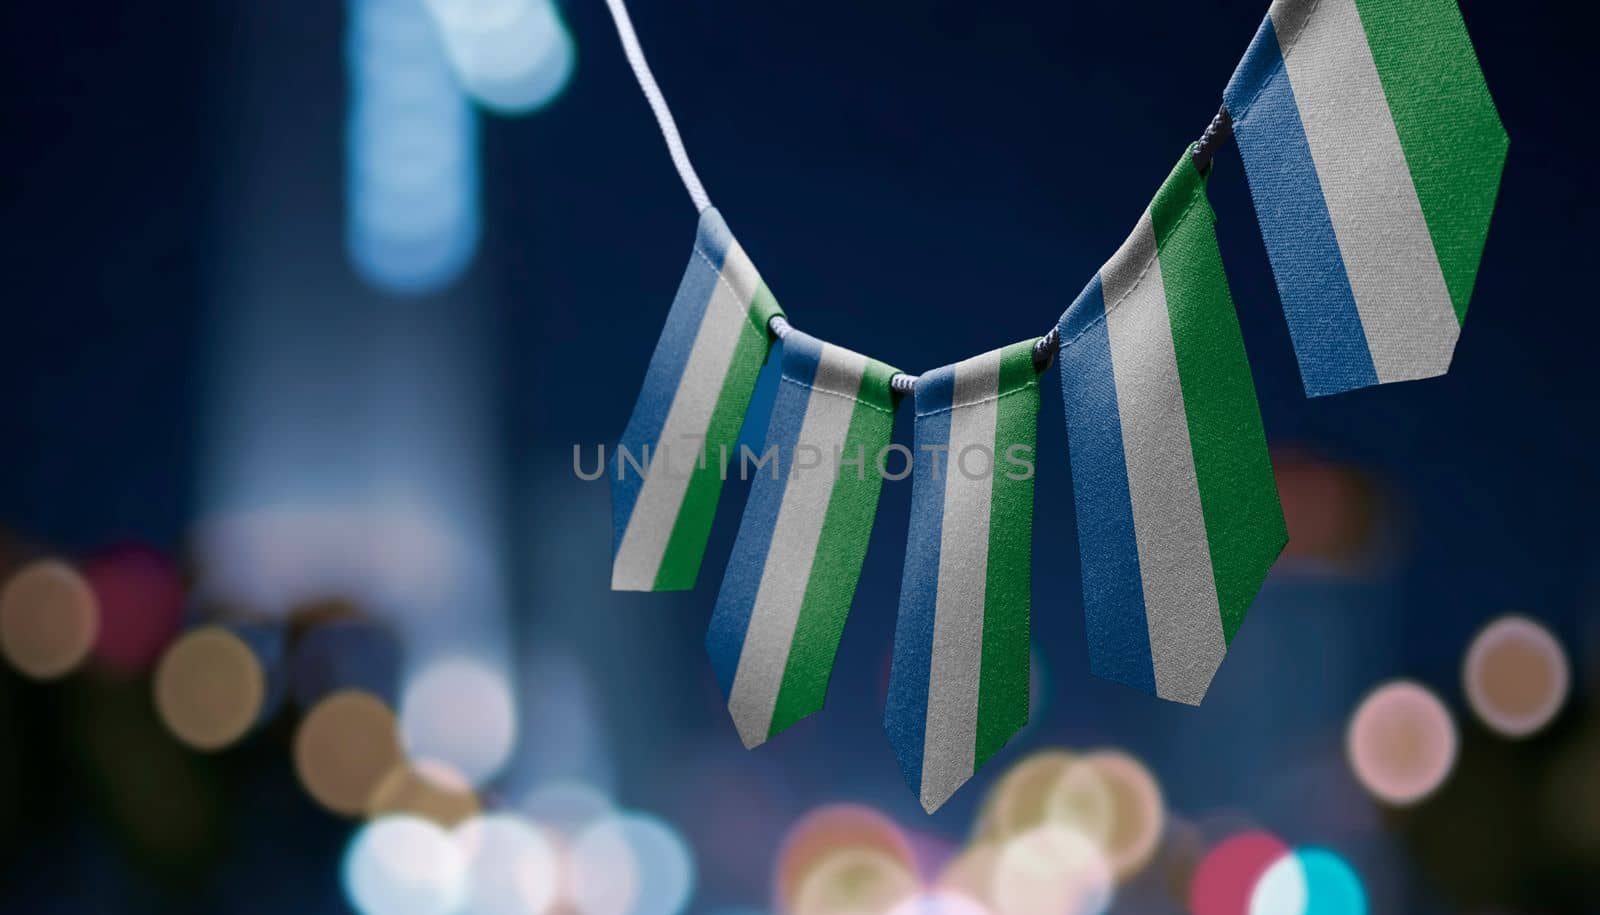 A garland of Sierra Leone national flags on an abstract blurred background.